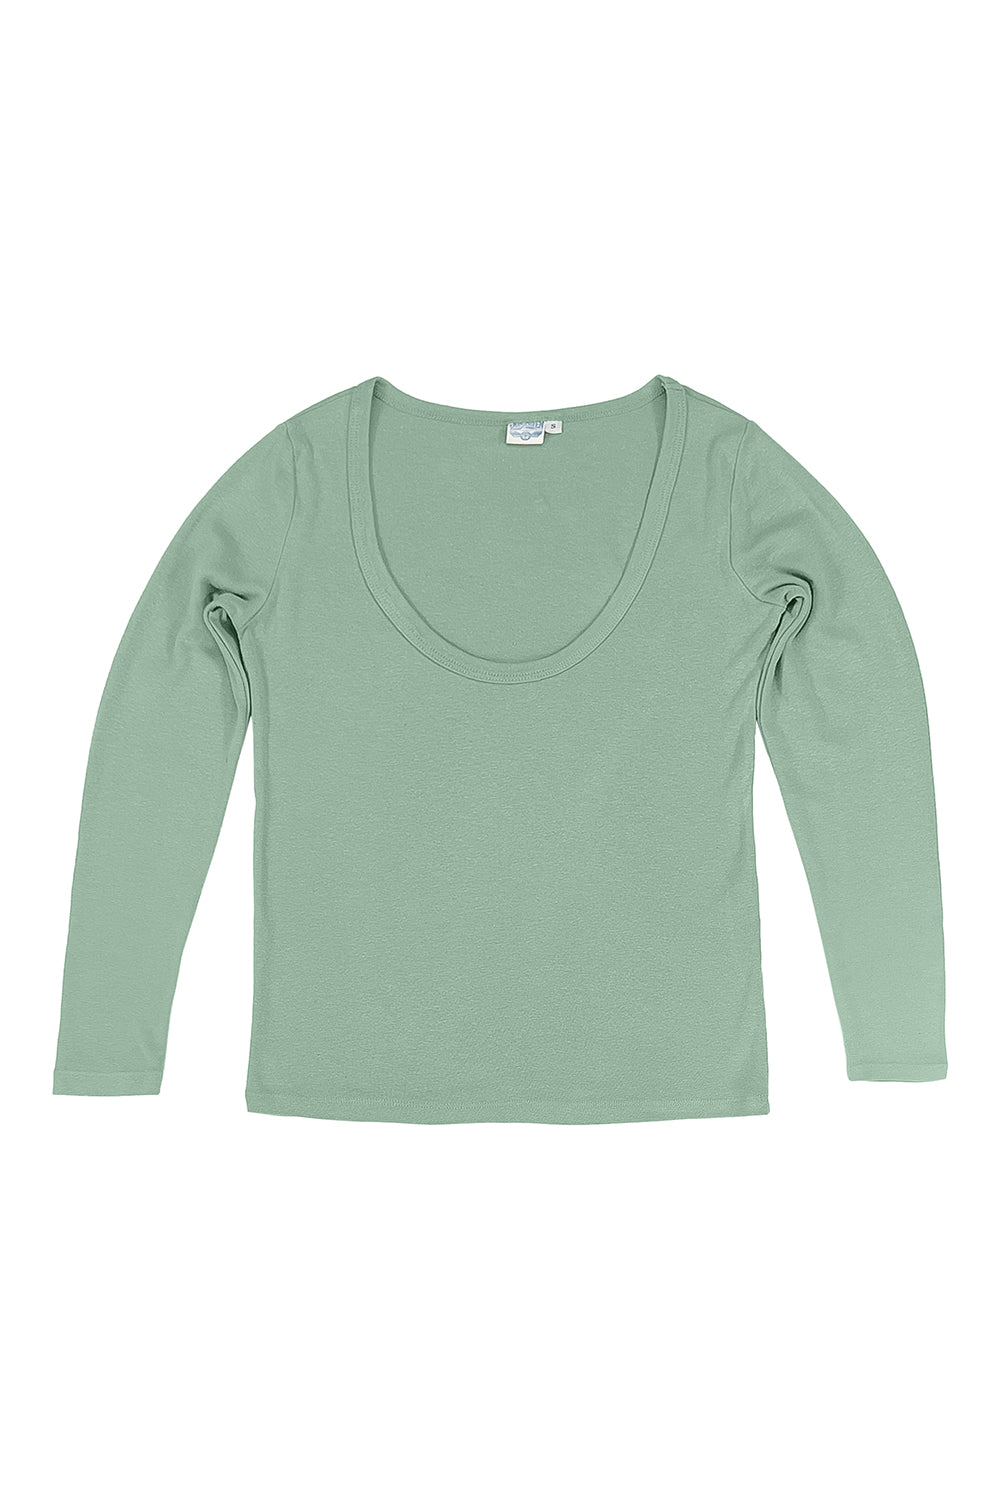 Paseo Long Sleeve Tee | Jungmaven Hemp Clothing & Accessories / Color: Sage Green